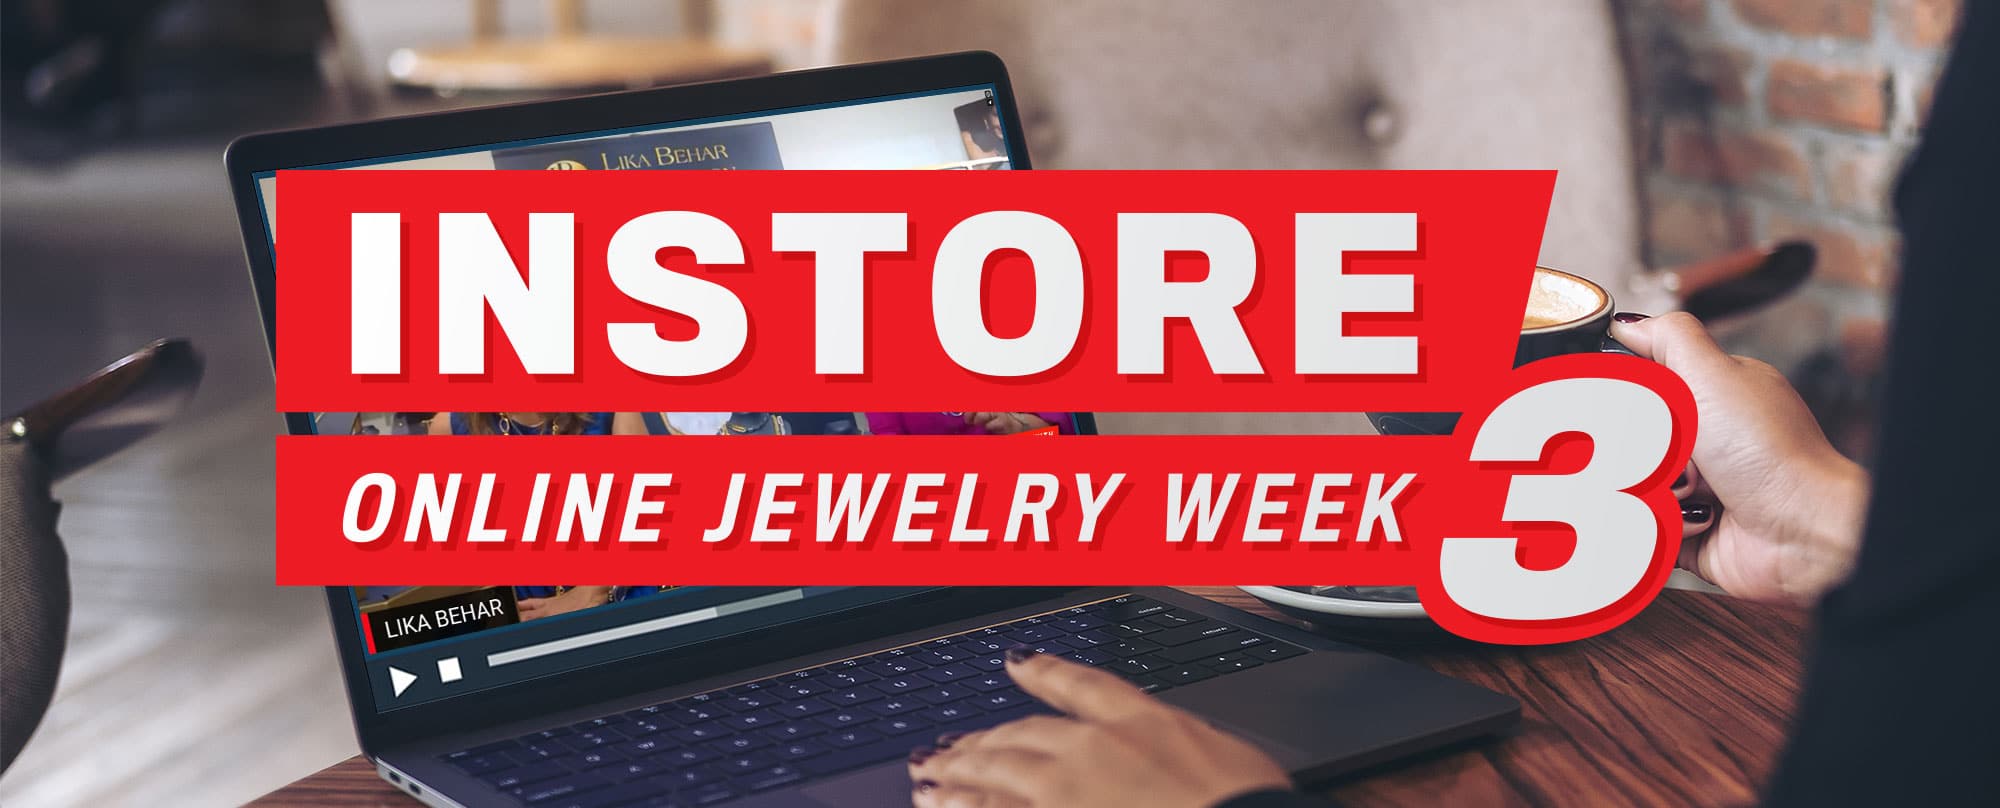 INSTORE Online Jewelry Week 3: Get All the Session Replays Here!